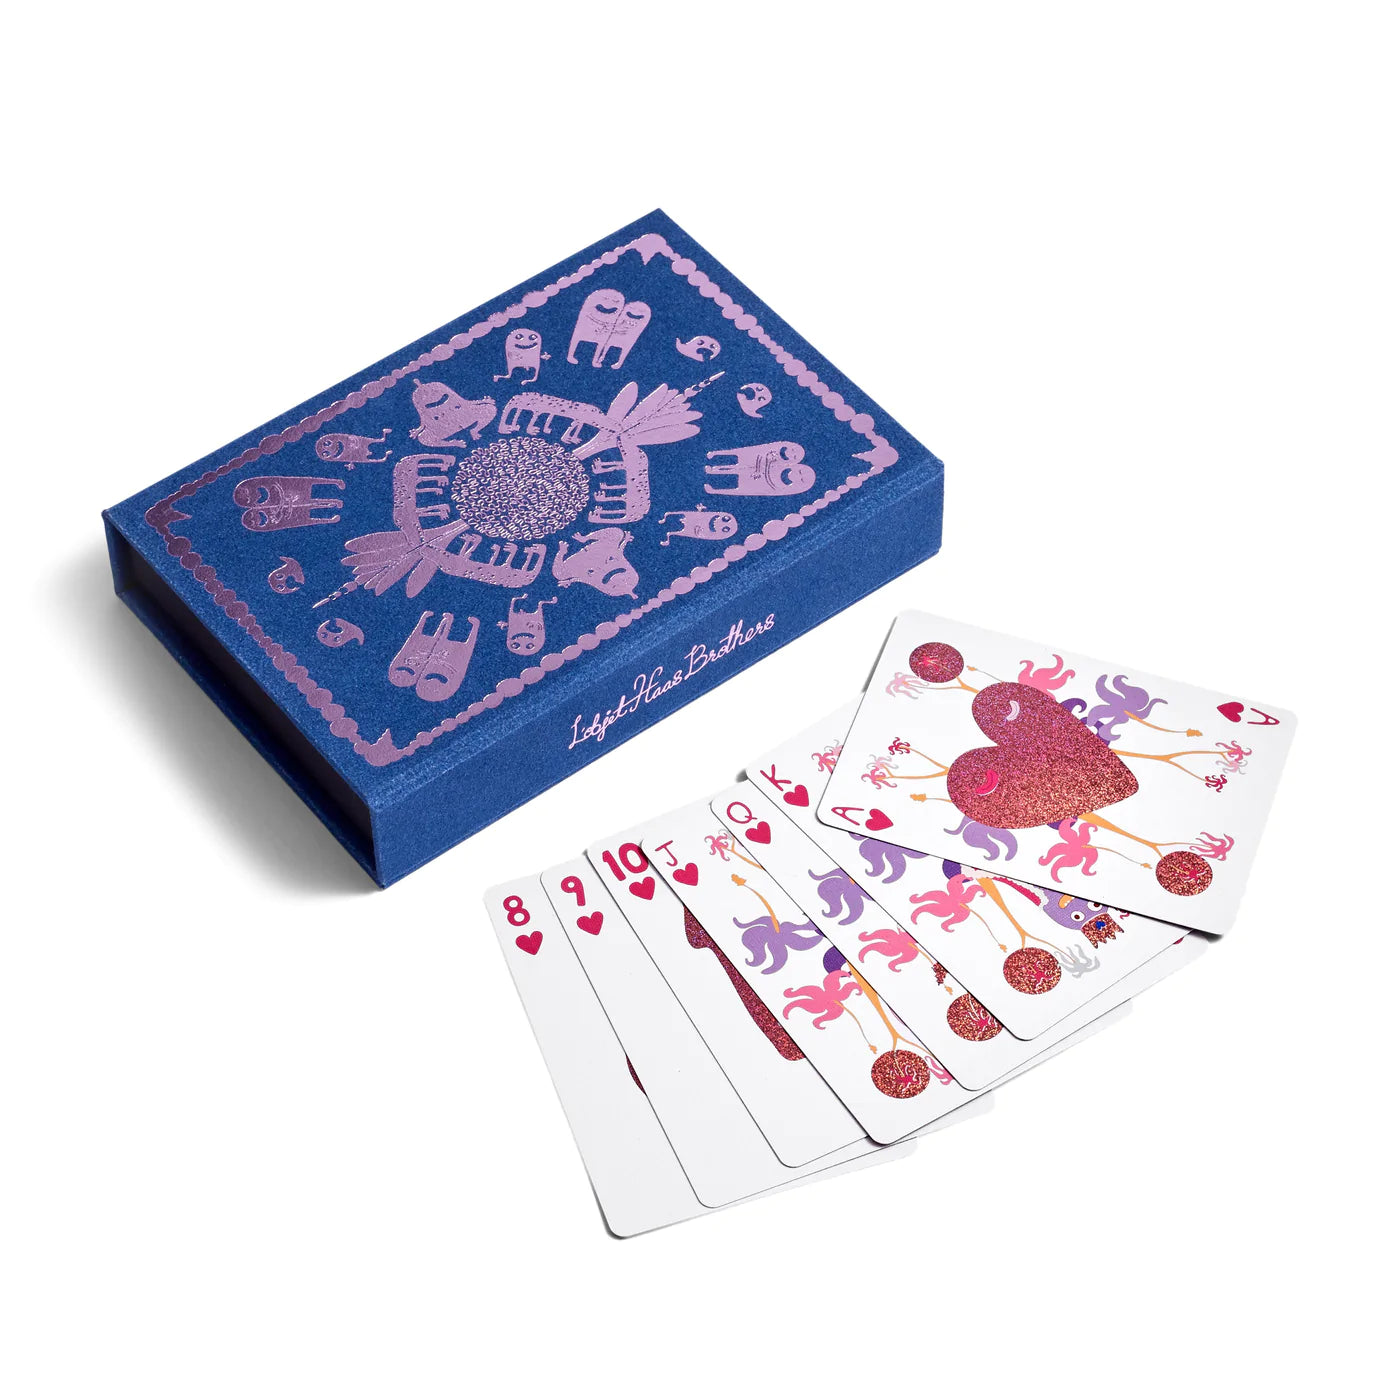 Haas Brothers Playing Cards